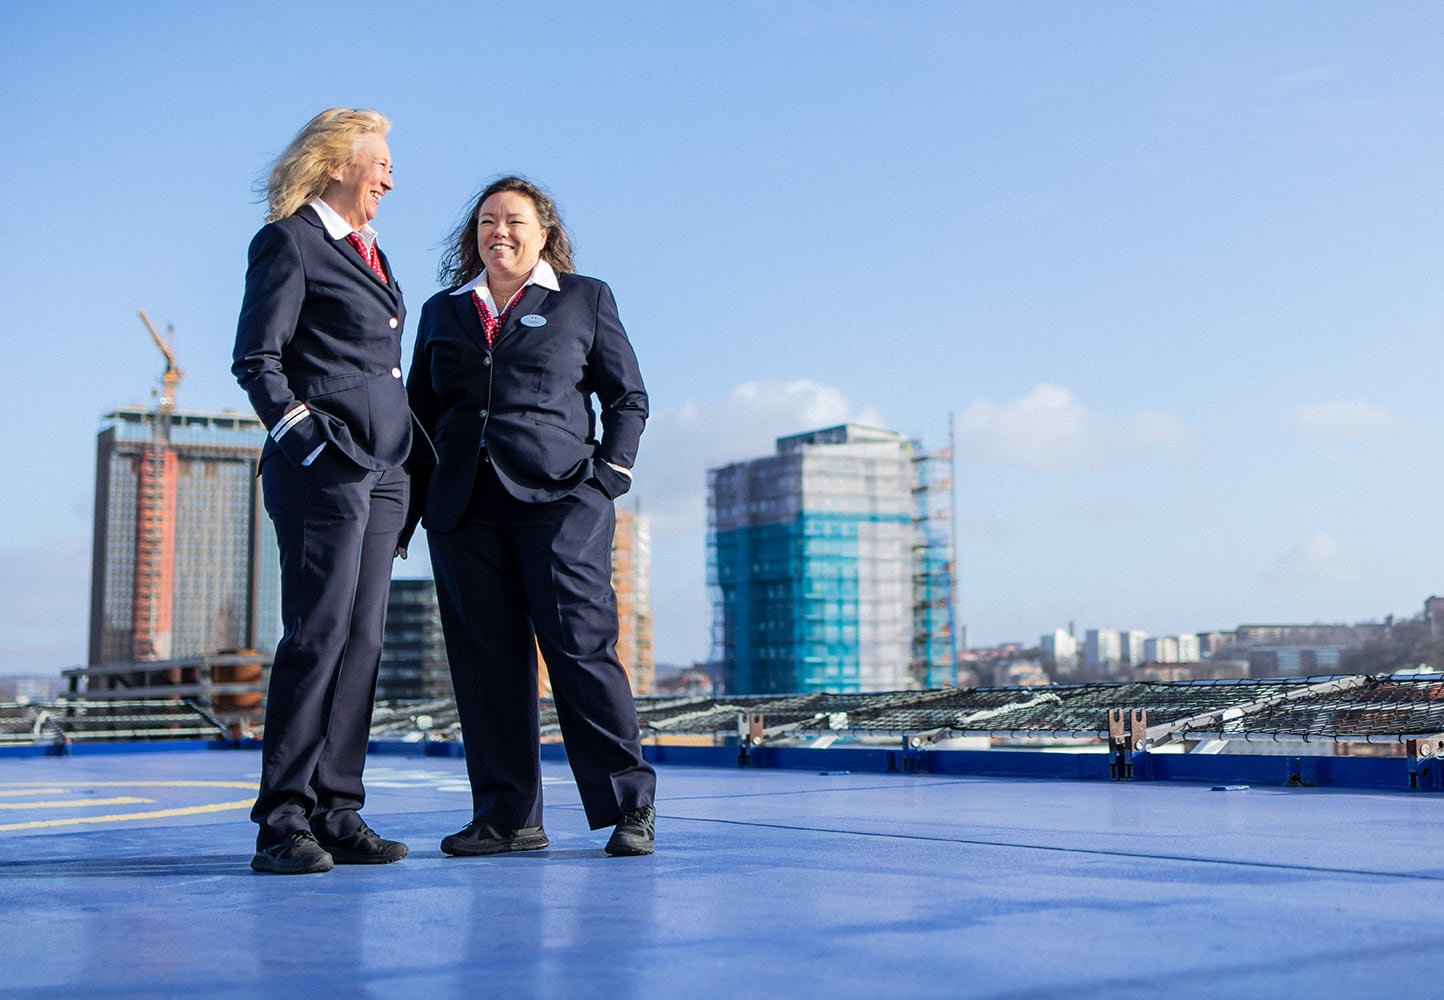 Two women with a city skyline background